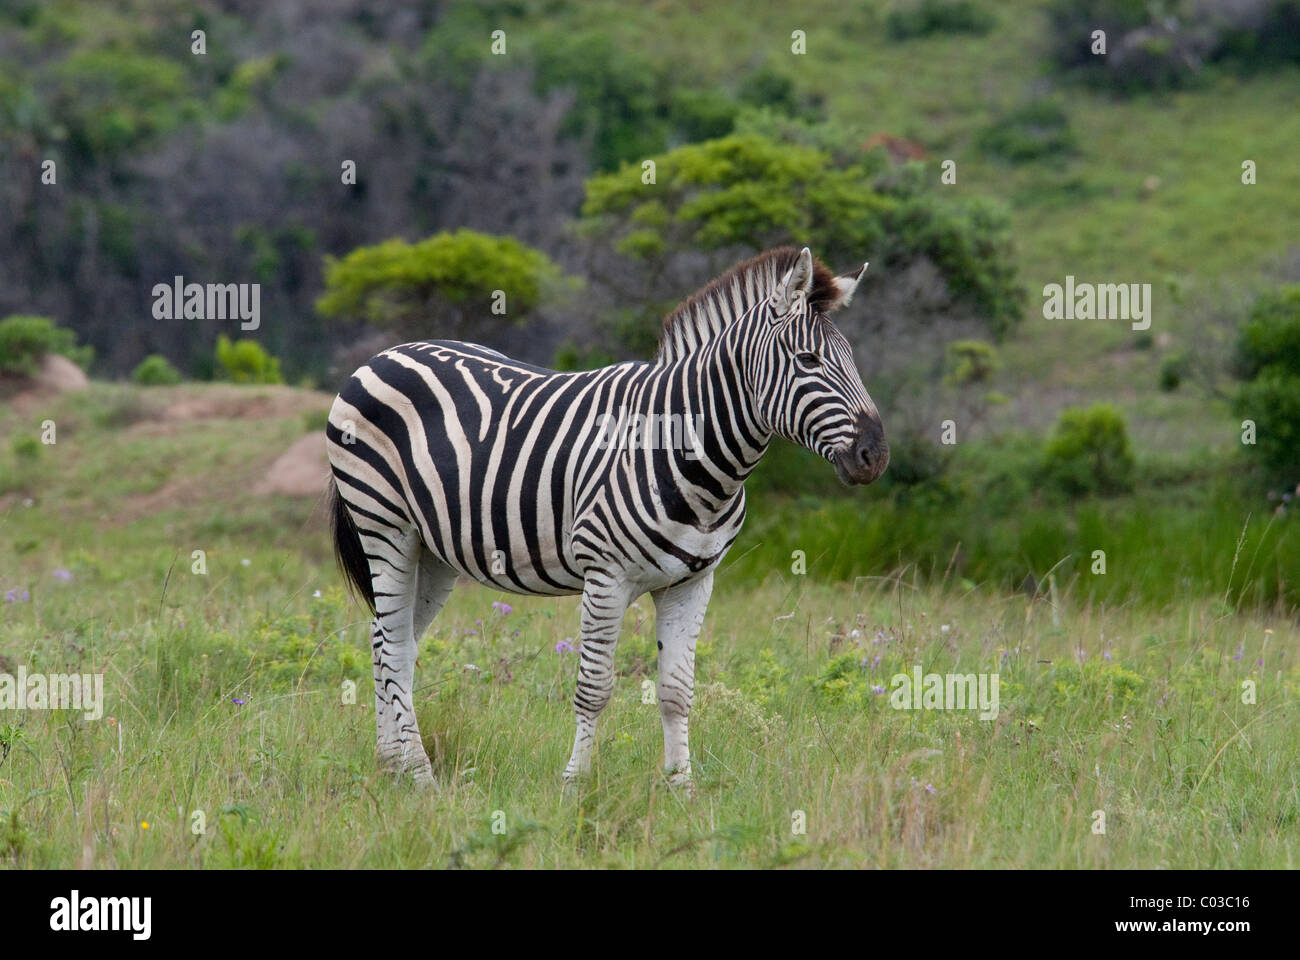 South Africa, East London, Inkwenkwezi Private Game Reserve. Common or Burchell's zebra. Stock Photo